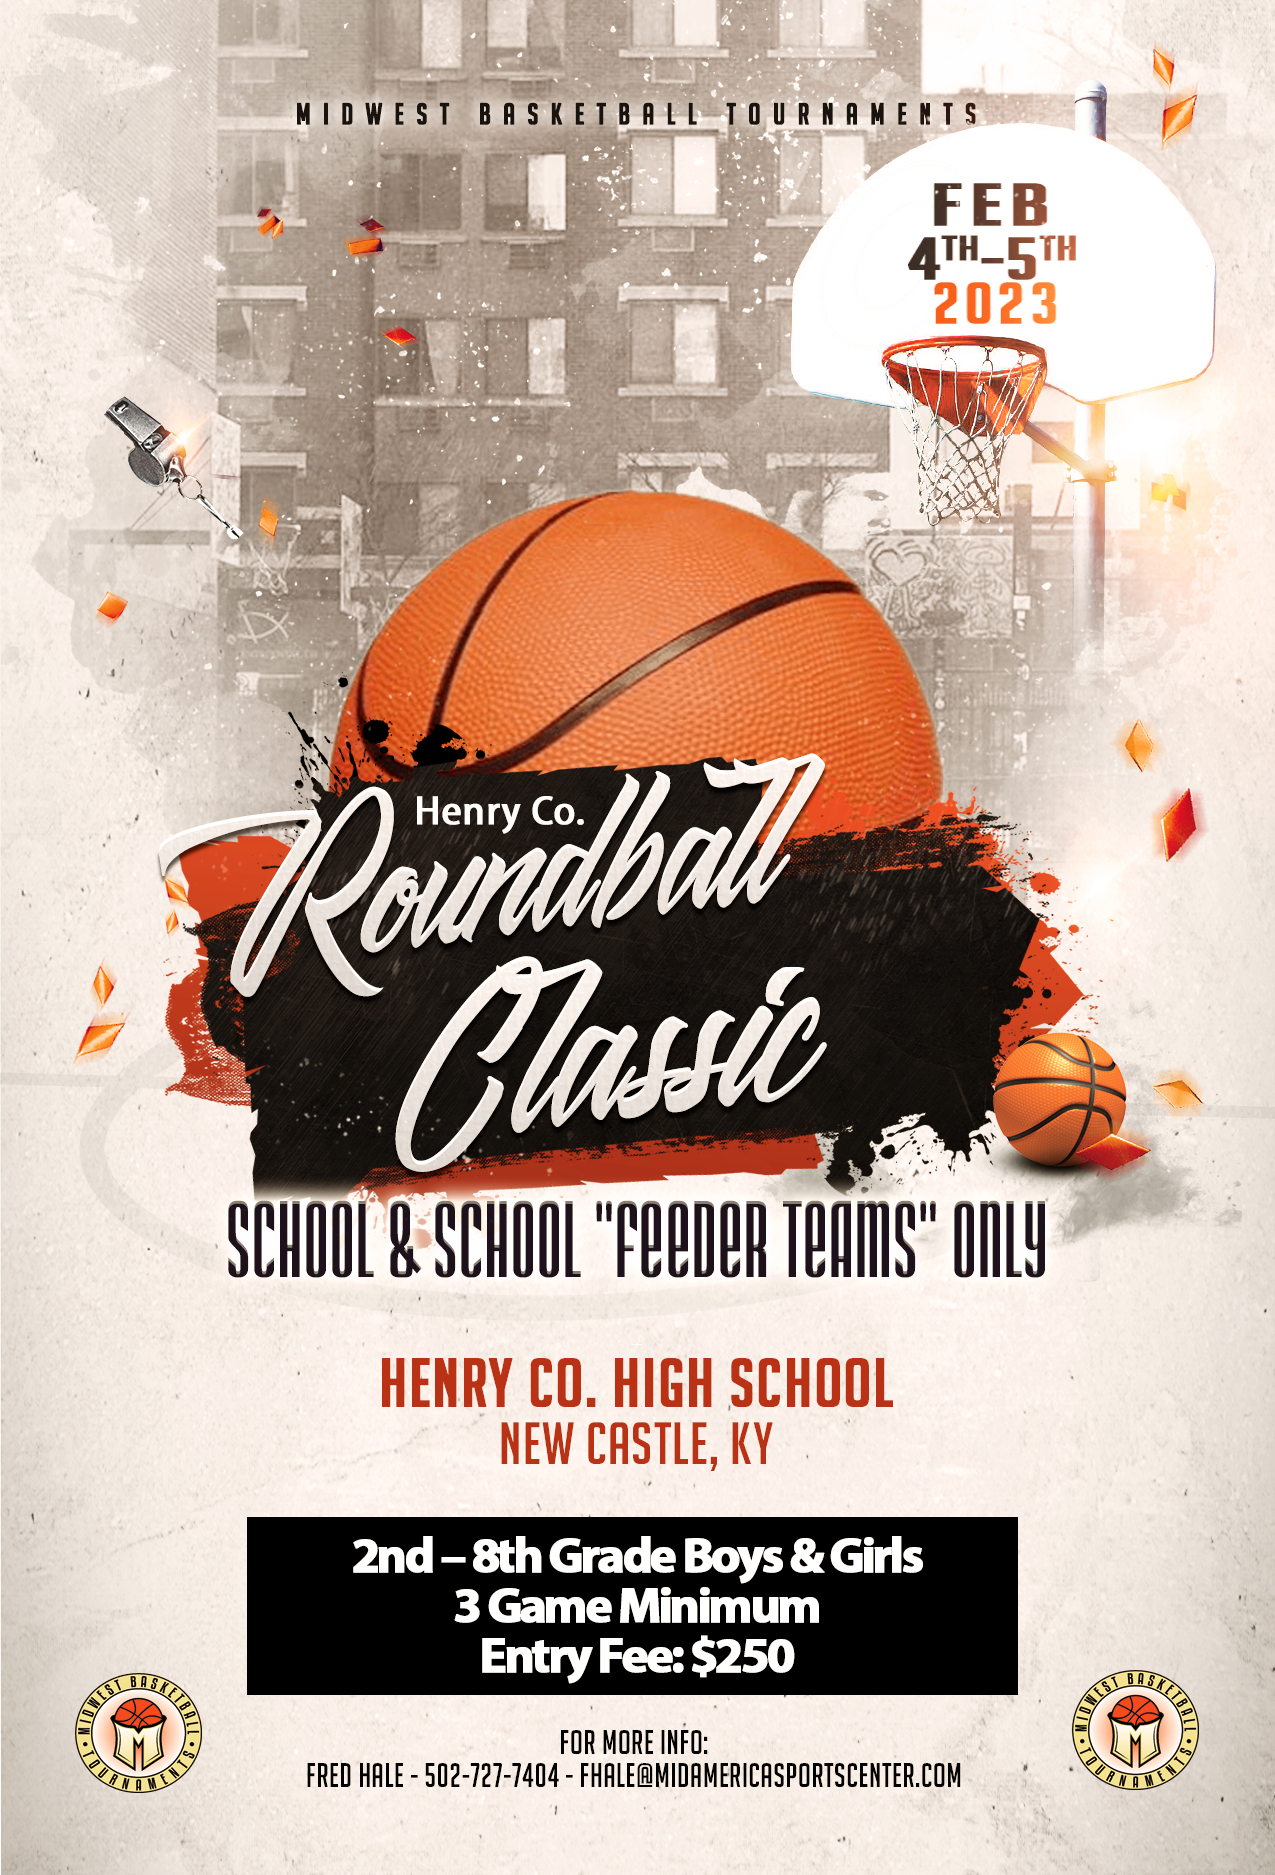 <strong><span style="font-size: 12pt; background-color: #ffffff;"><span style="color: #ff6600;">Henry Co. Roundball Shootout<br />Feb. 4-5, 2023<br /><a href="http://www.midwestbballtournaments.com/ViewEvent.aspx?EID=1019">Click Here for Details</a></span></span></strong>